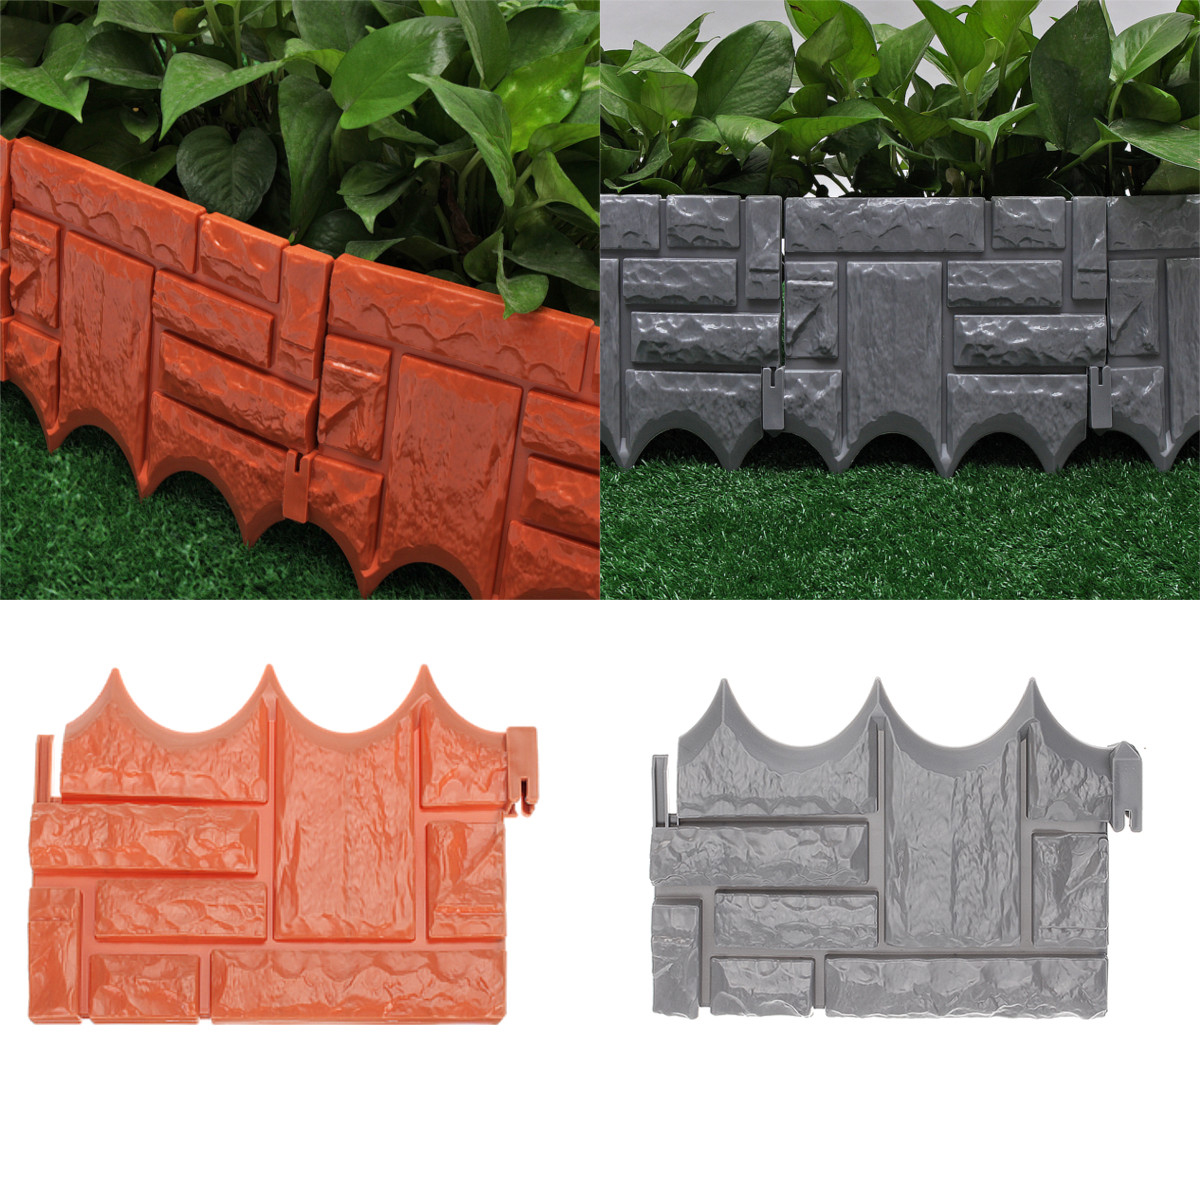 Find 6Pcs Plastic Fence Outdoor Garden Lawn Edging Yard Plant Border Panel Paths Garden Landscape Decorations for Sale on Gipsybee.com with cryptocurrencies